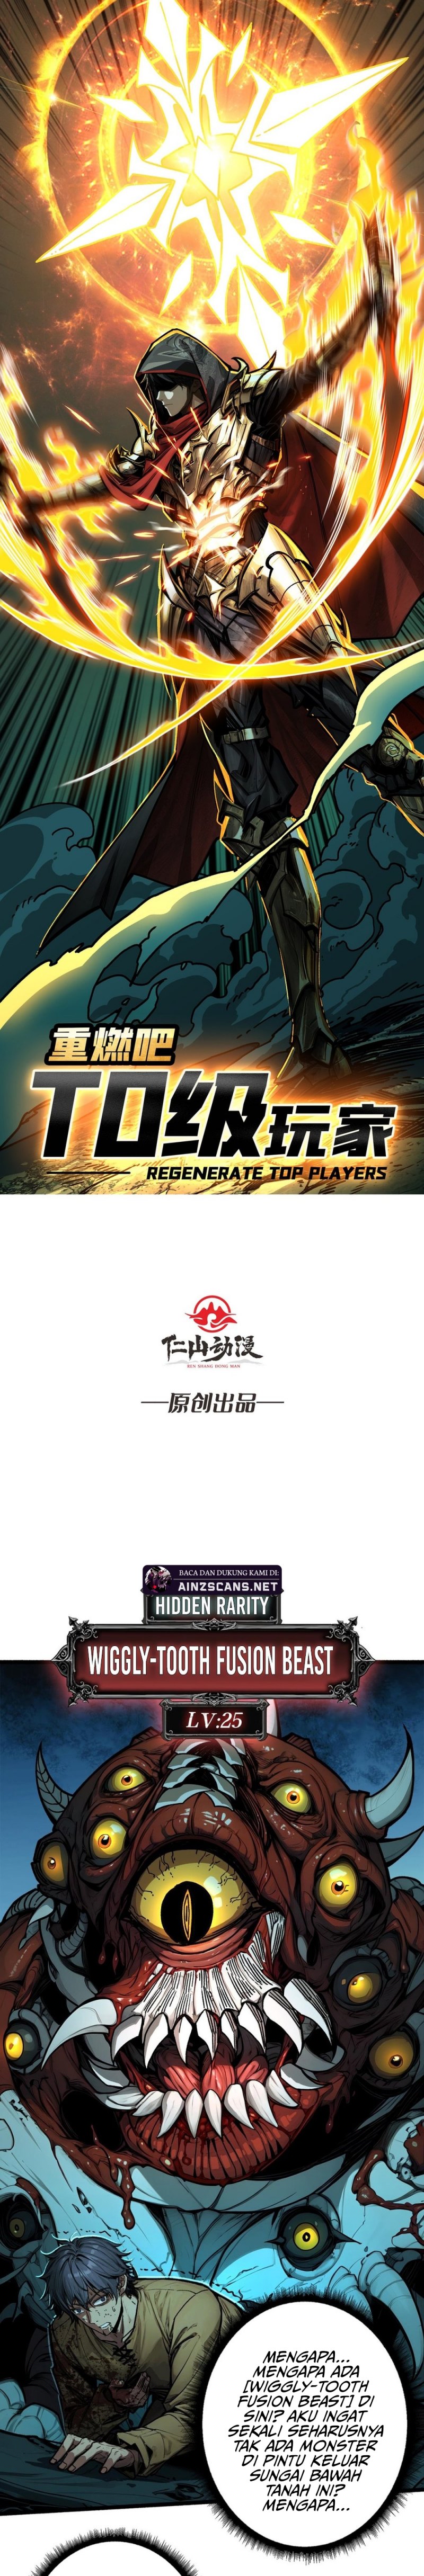 Regenerate Top Players Chapter 5